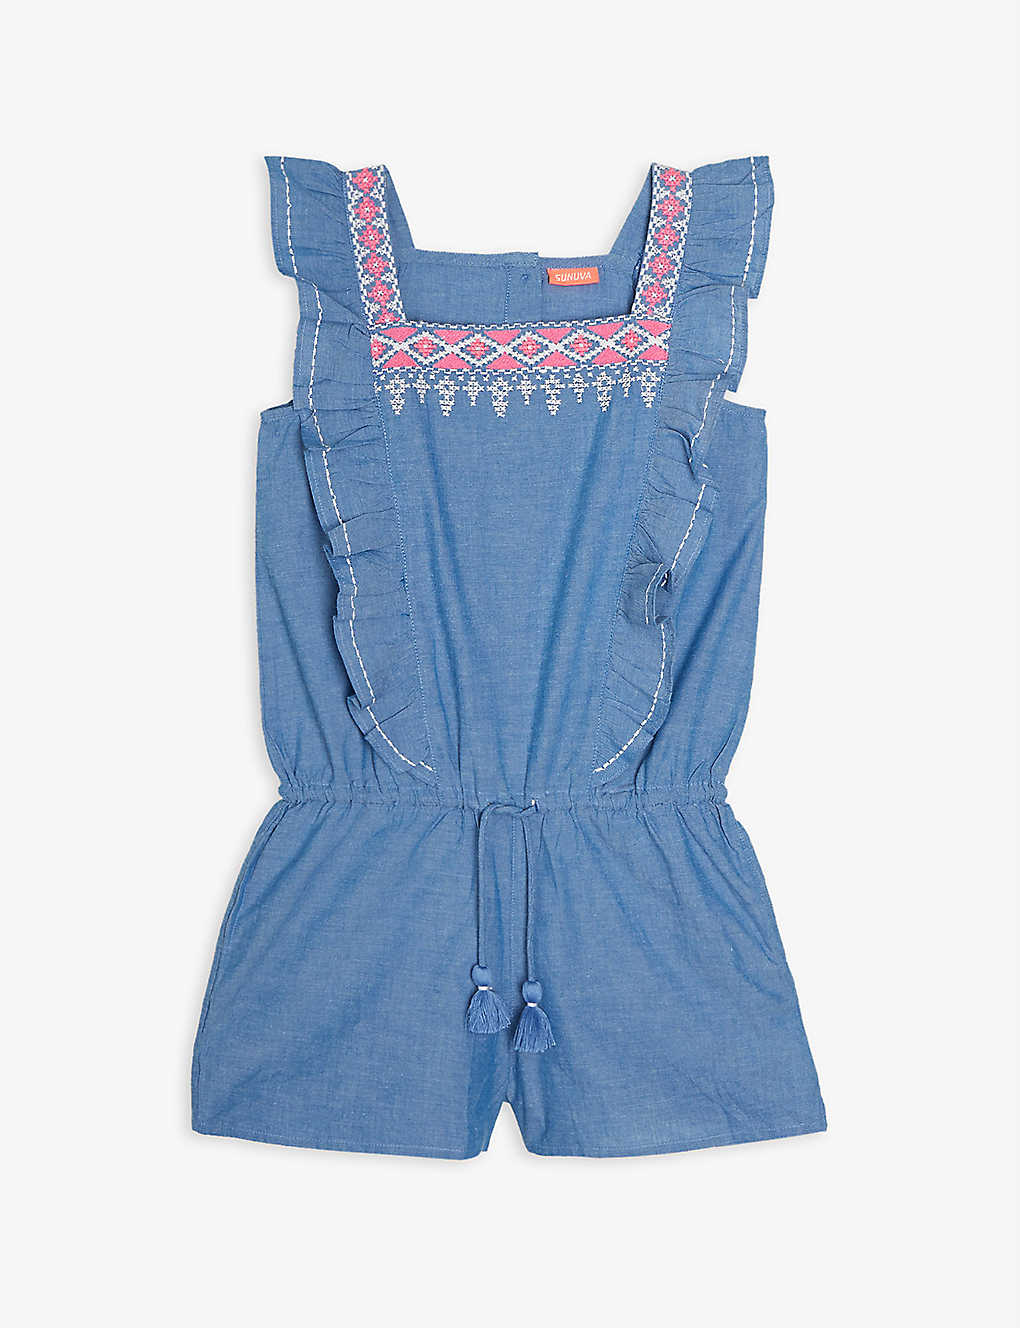 Chambray frilled cotton playsuit 3-14 years Selfridges & Co Girls Clothing Playsuits 